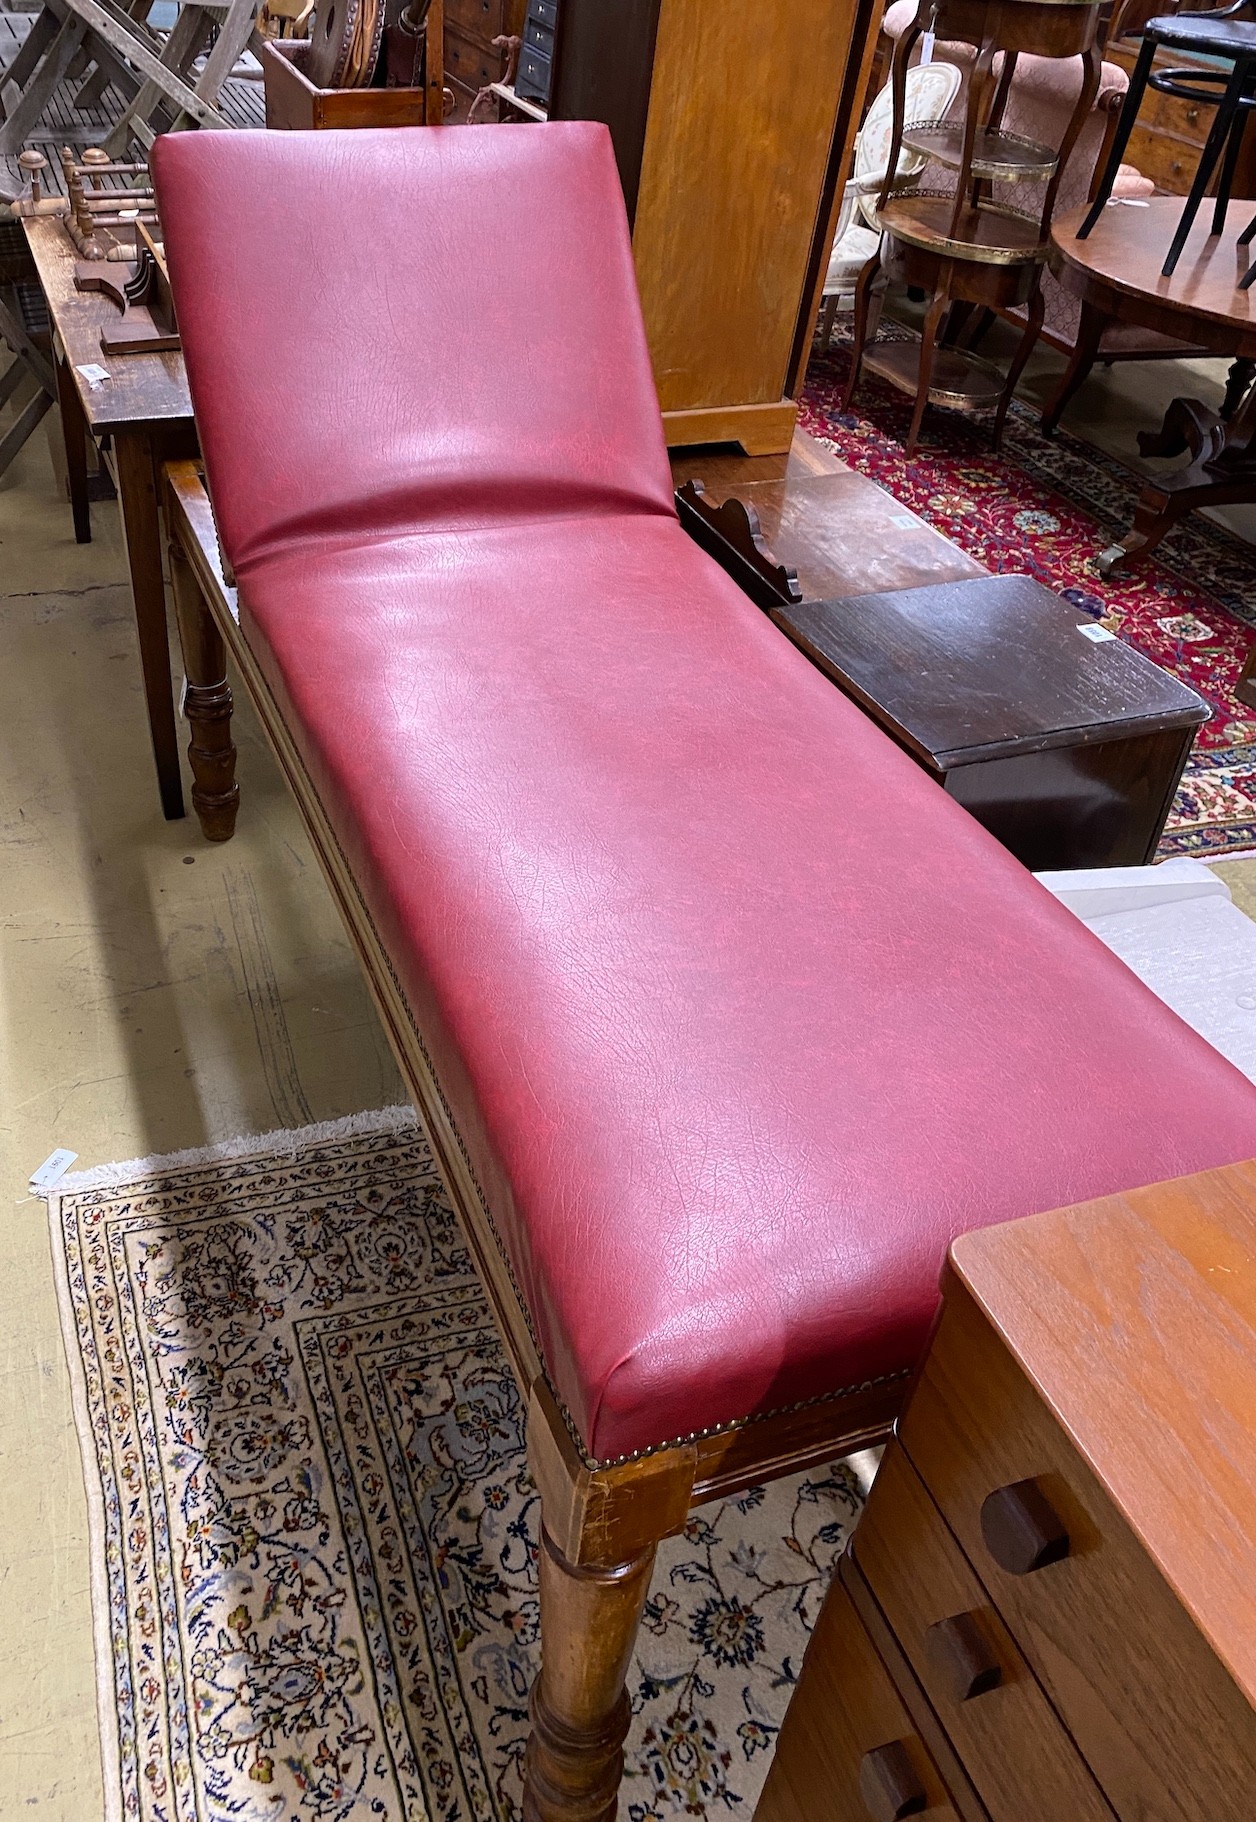 An Edwardian mahogany examination table by Ferris & Co. with red leatherette upholstery, length 186cm, height 63cm